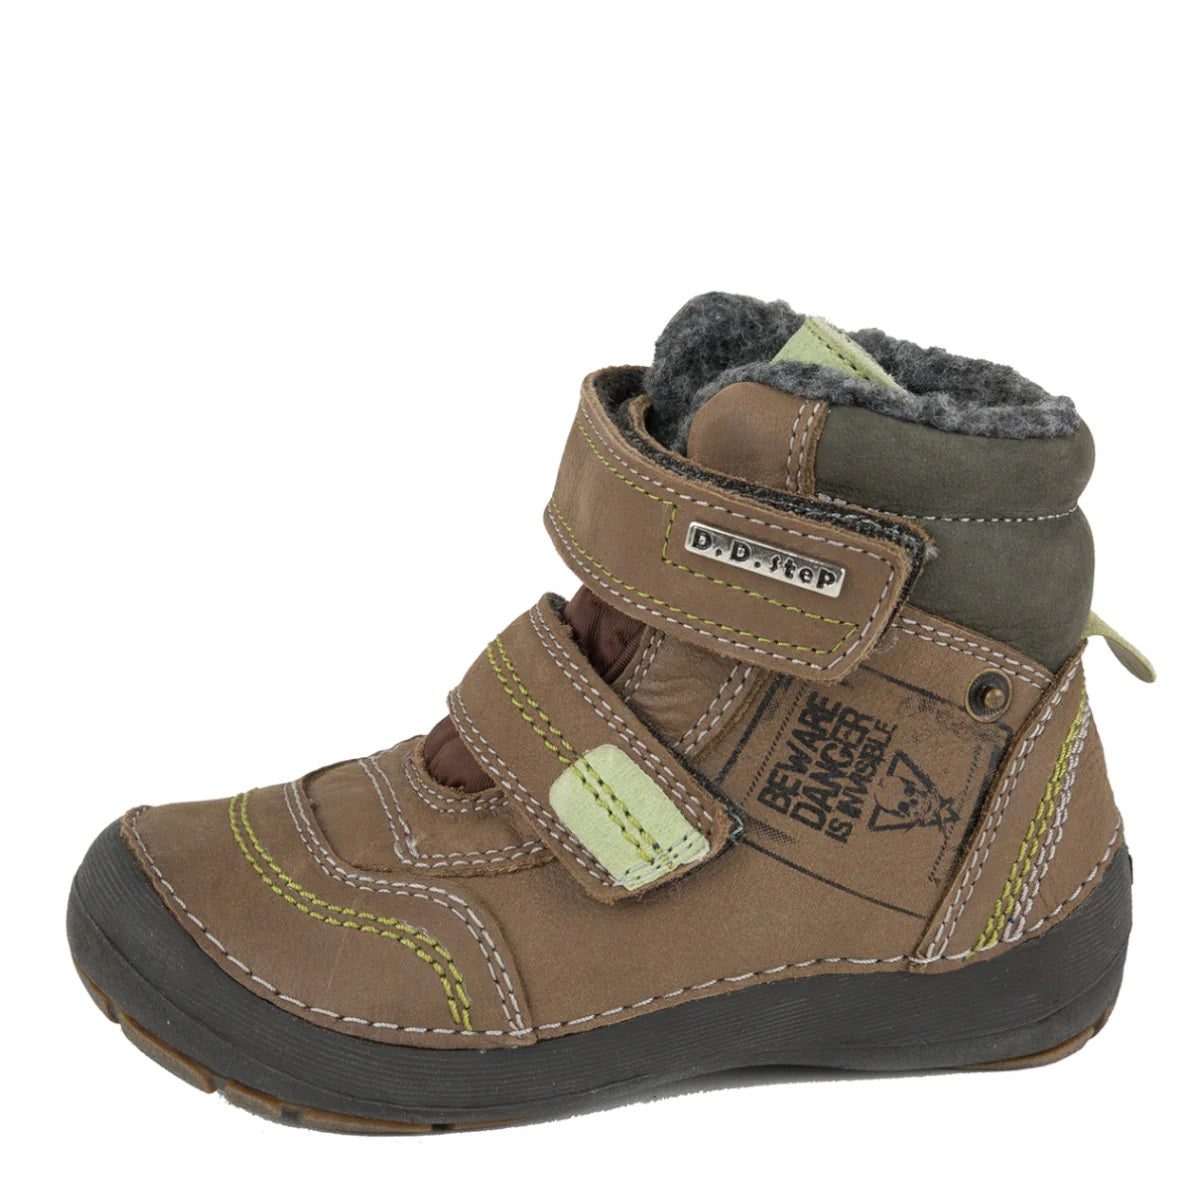 Premium quality high-top shoes with faux fur insulation and genuine leather upper in light brown color. Thanks to its high level of specialization, D.D. Step knows exactly what your child’s feet need, to develop properly in the various phases of growth. The exceptional comfort these shoes provide assure the well-being and happiness of your child.